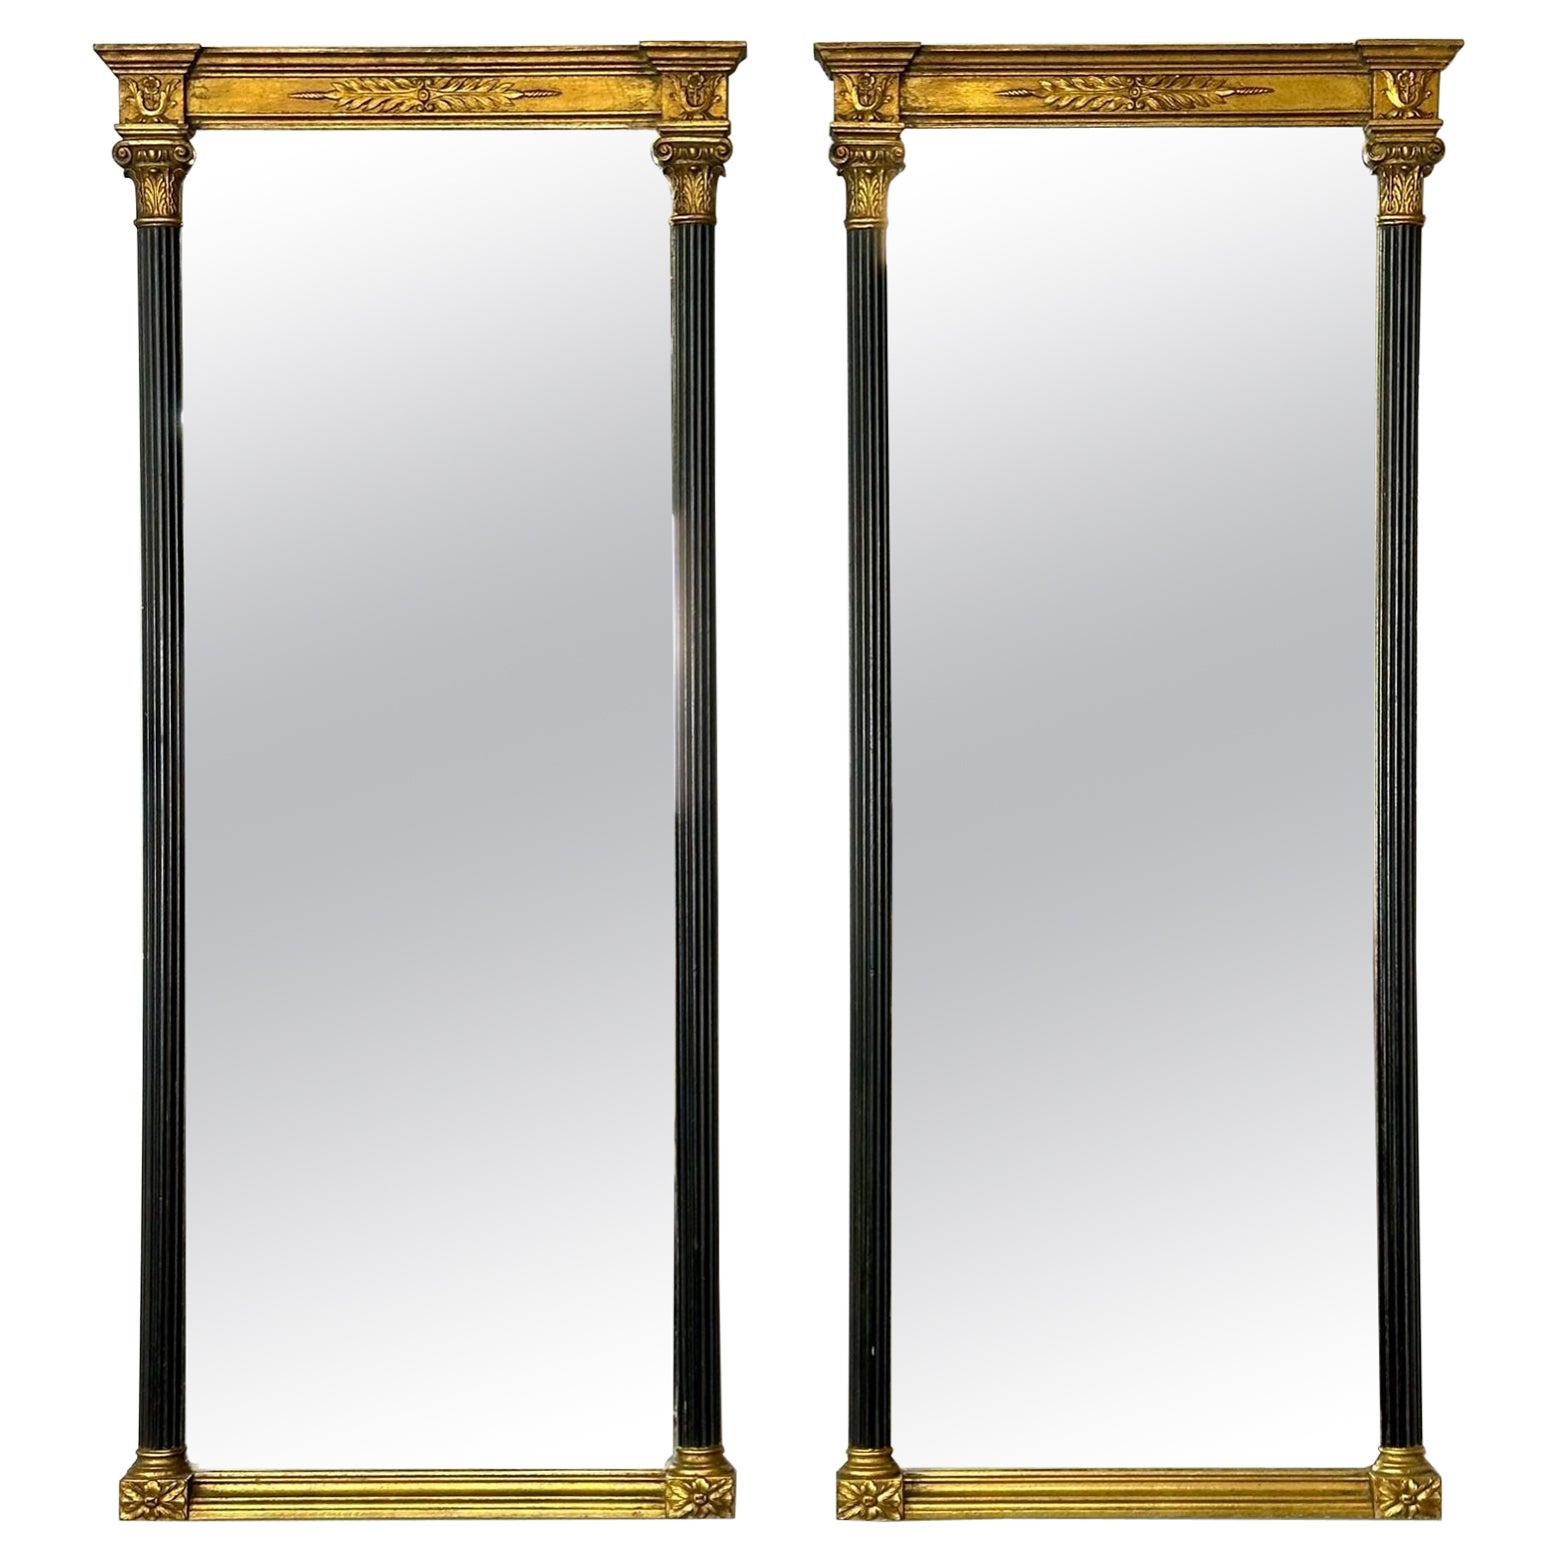 Pair of Gilt Gold and Ebony Wall, Console or Pier Mirrors